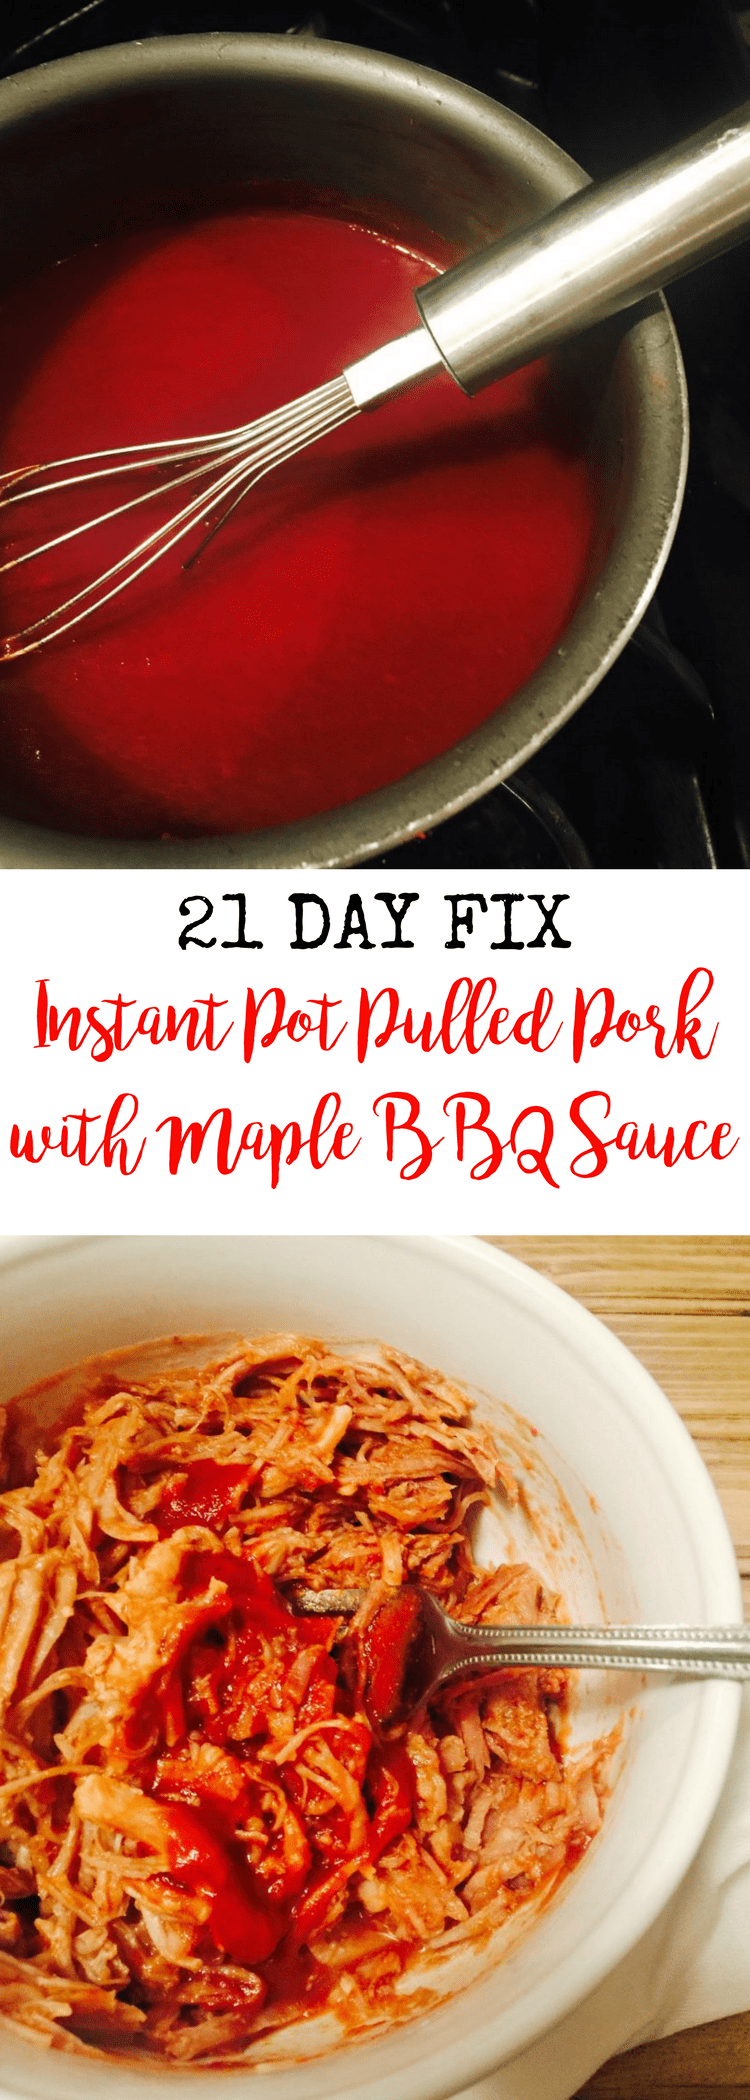 21 Day Fix Instant Pot Pulled Pork with Maple BBQ Sauce | Confessions of a Fit Foodie